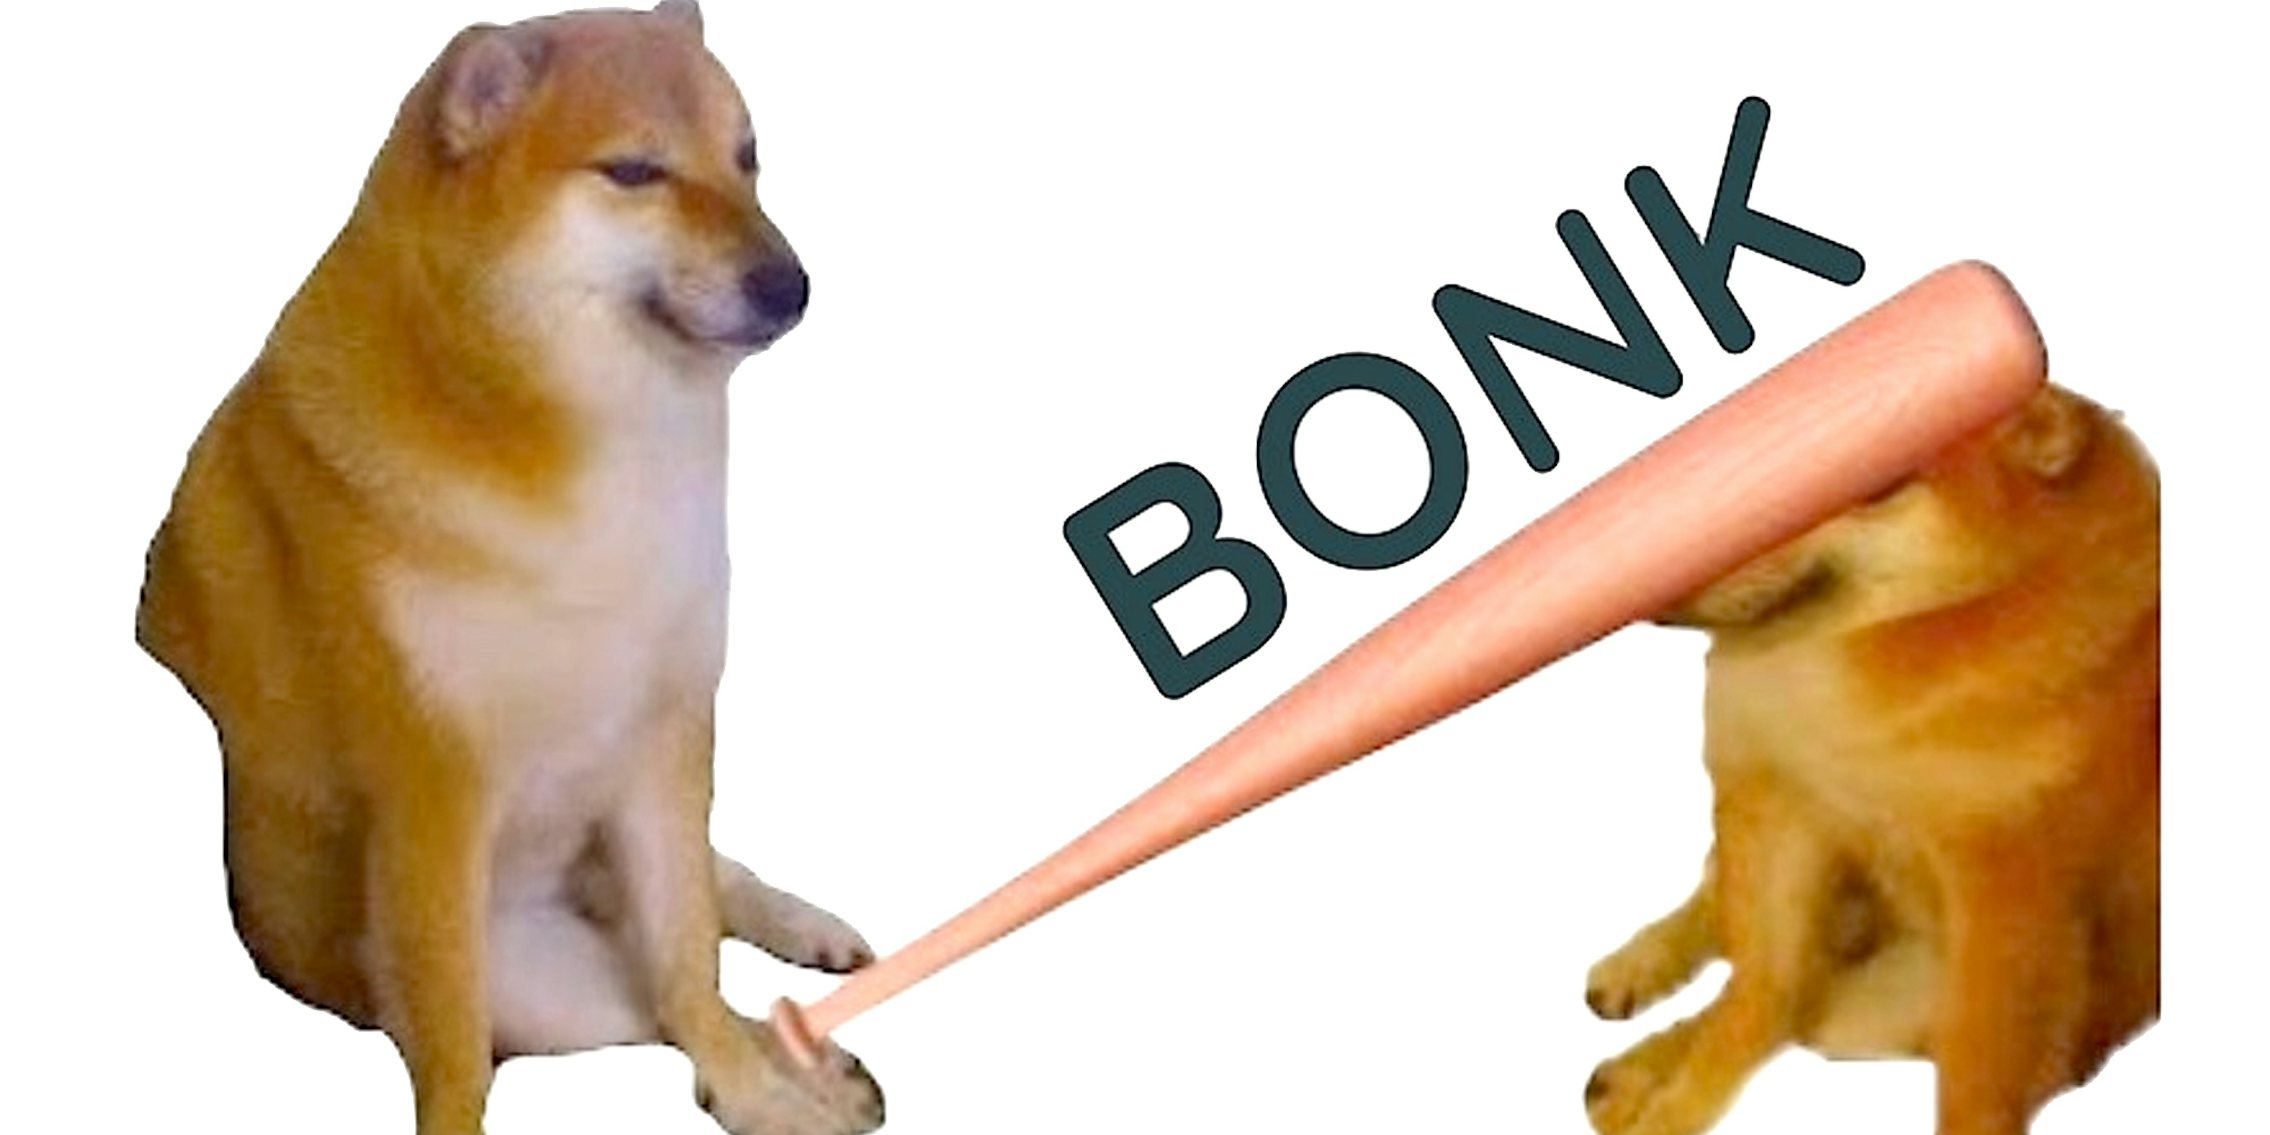 Bonk Meme: What Is It, and Who Is the Cute Dog Behind It?